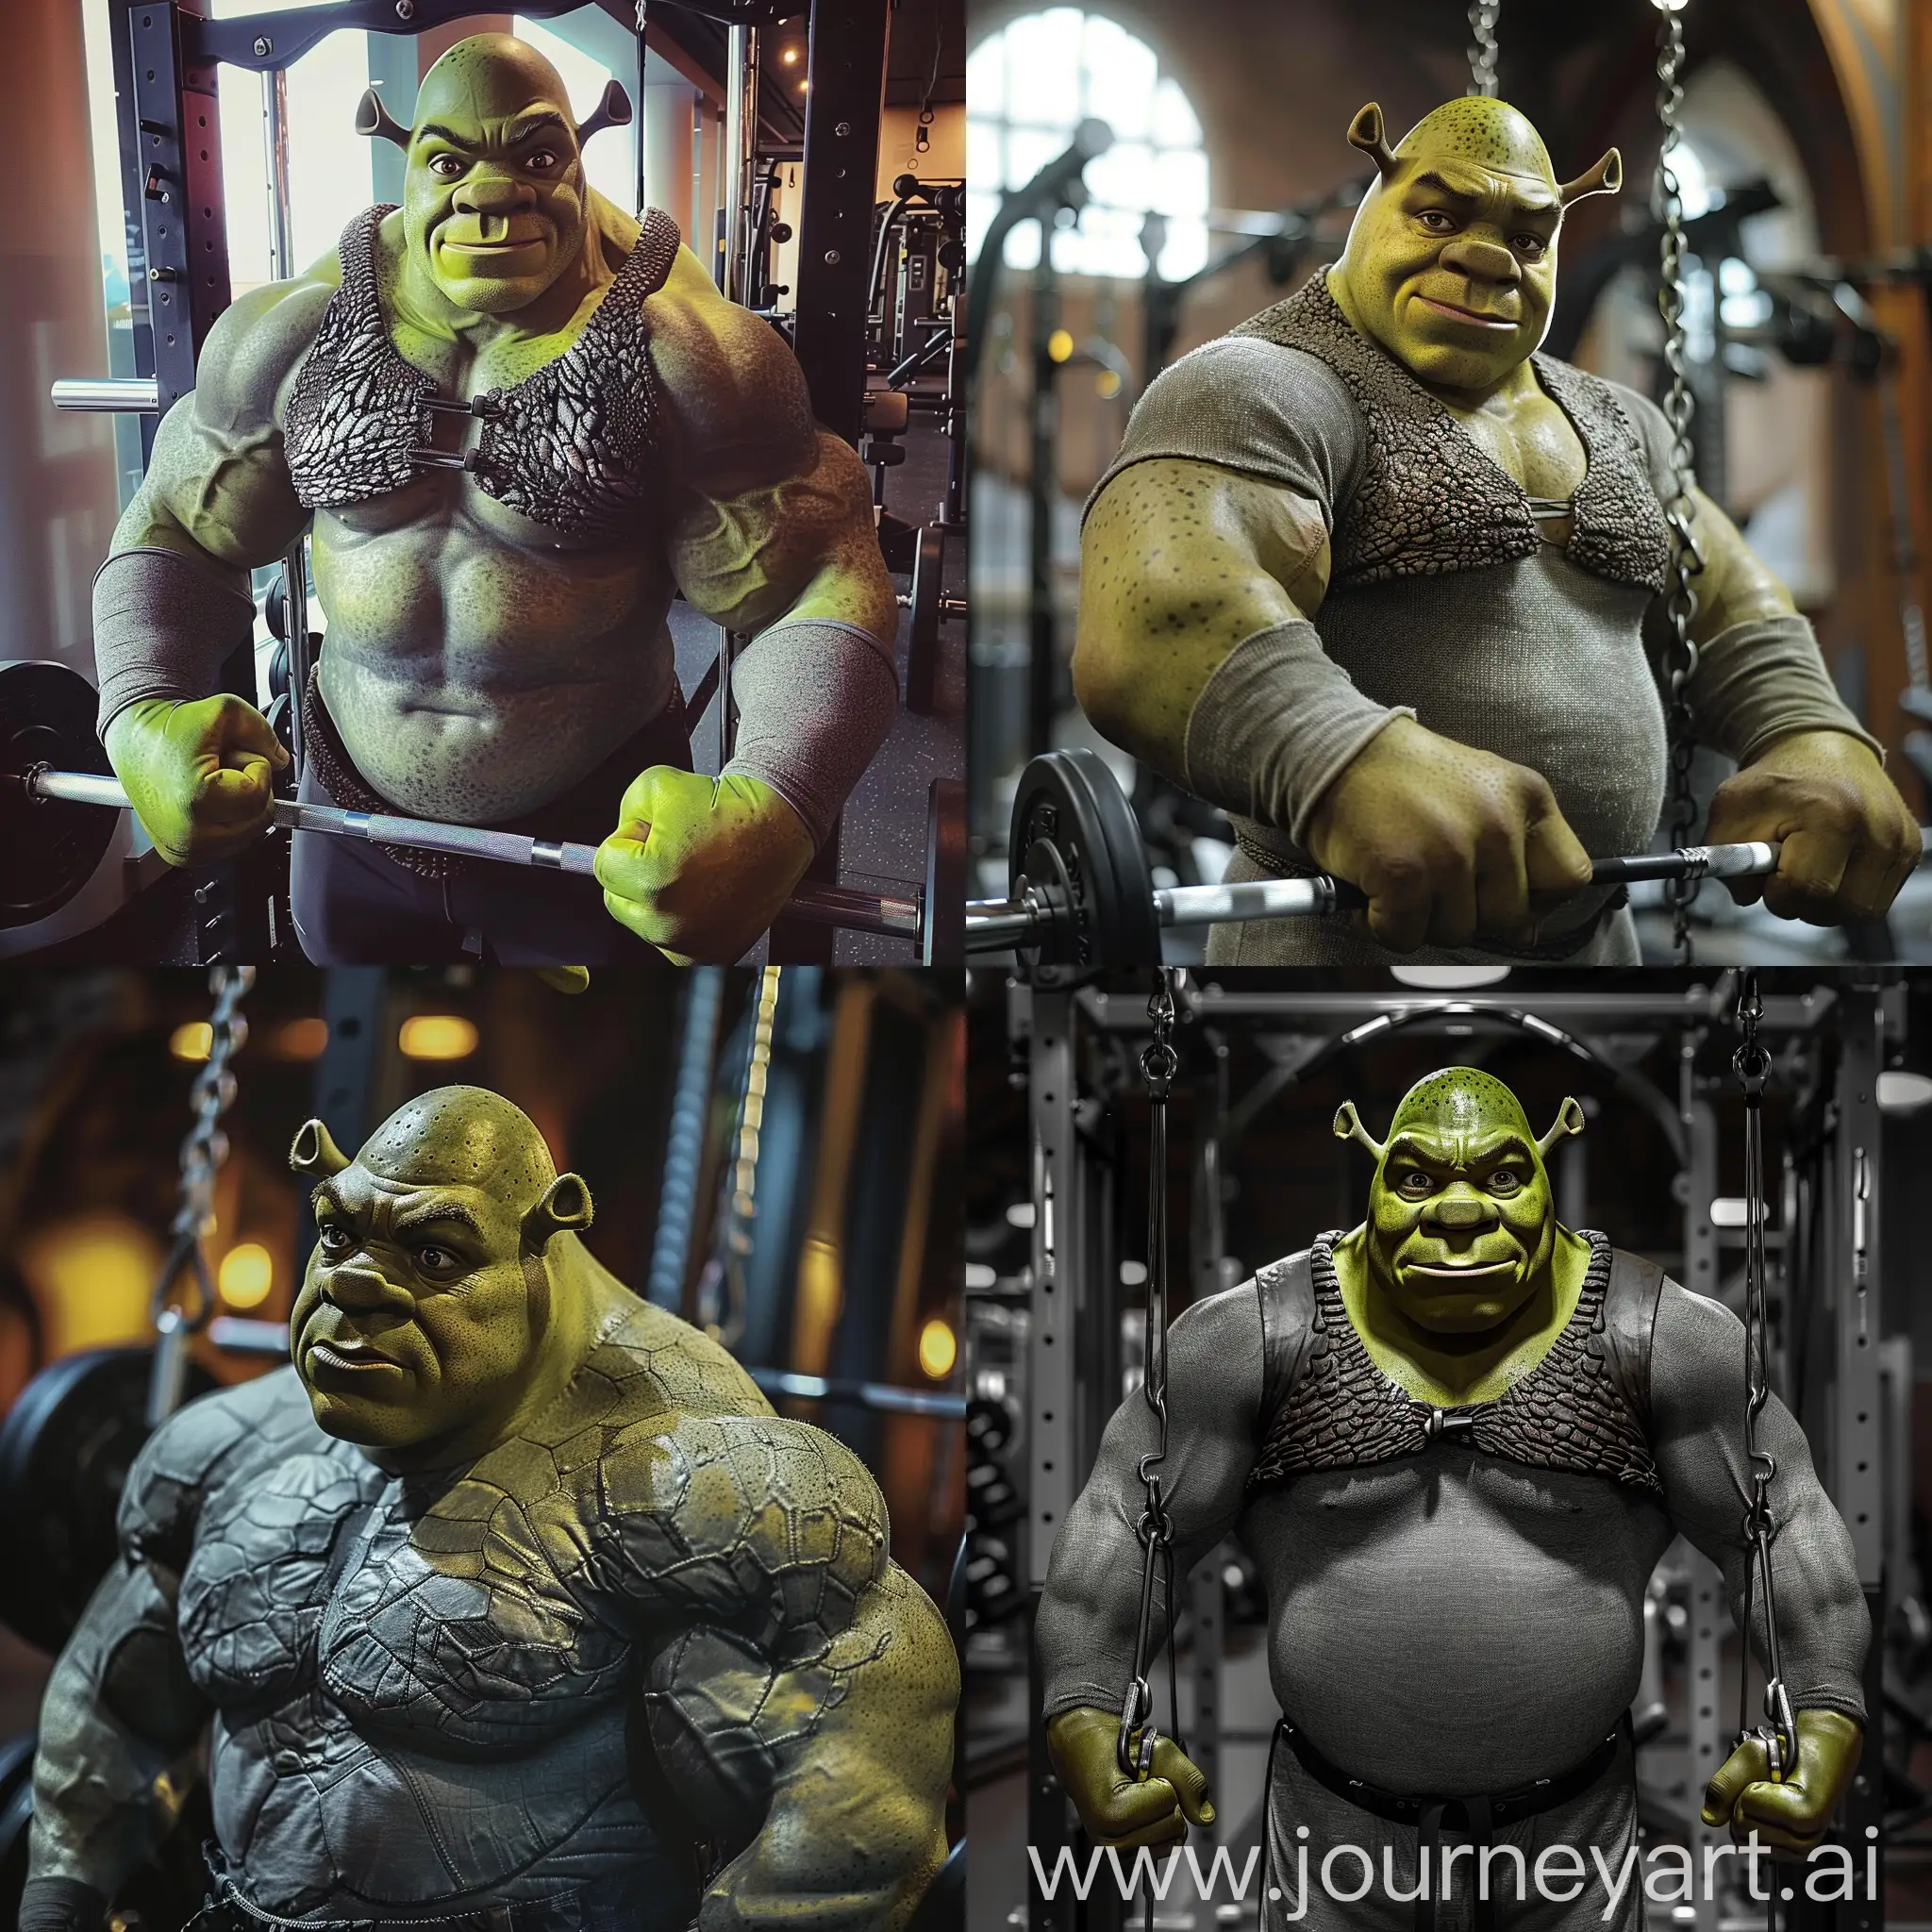 A pumped-up strong fit shrek with sharp cheekbones in the gym